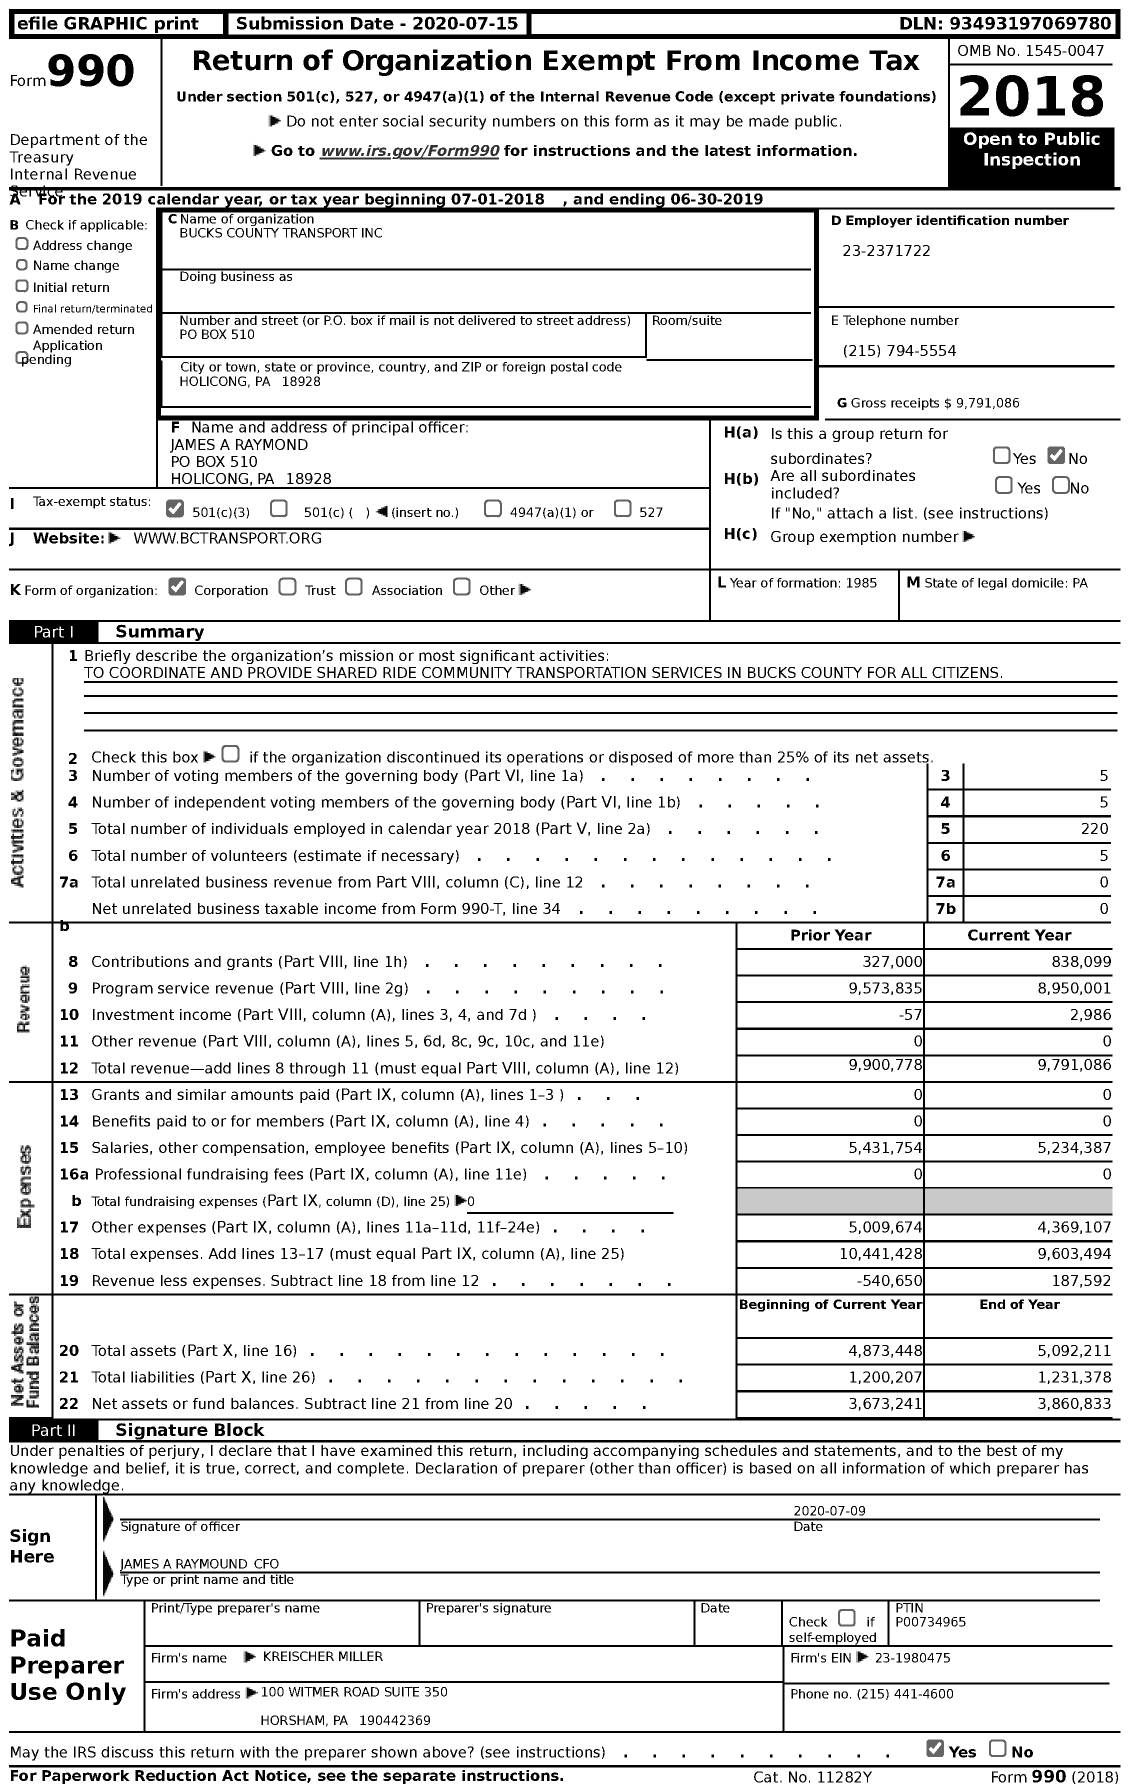 Image of first page of 2018 Form 990 for Bucks County Transport (BCT)